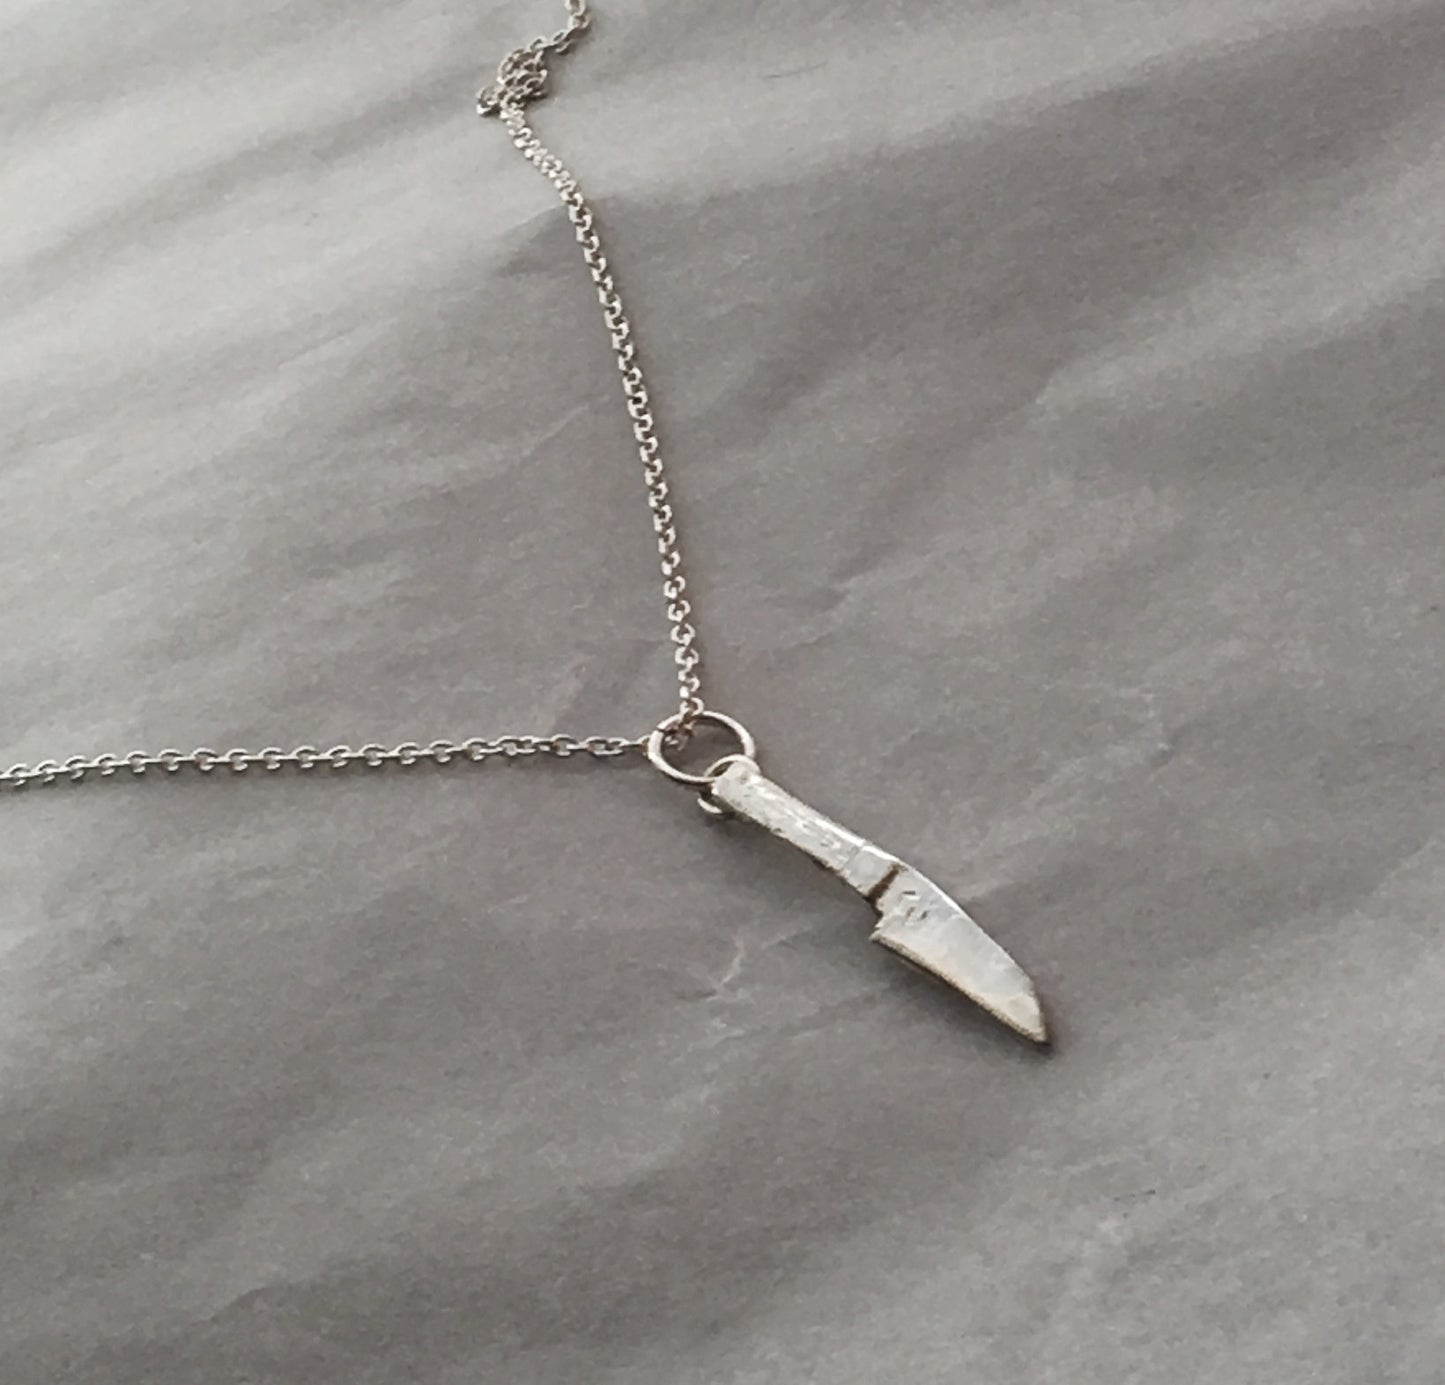 Sushi Knife Pendant Necklace in Sterling Silver with Cable Chain